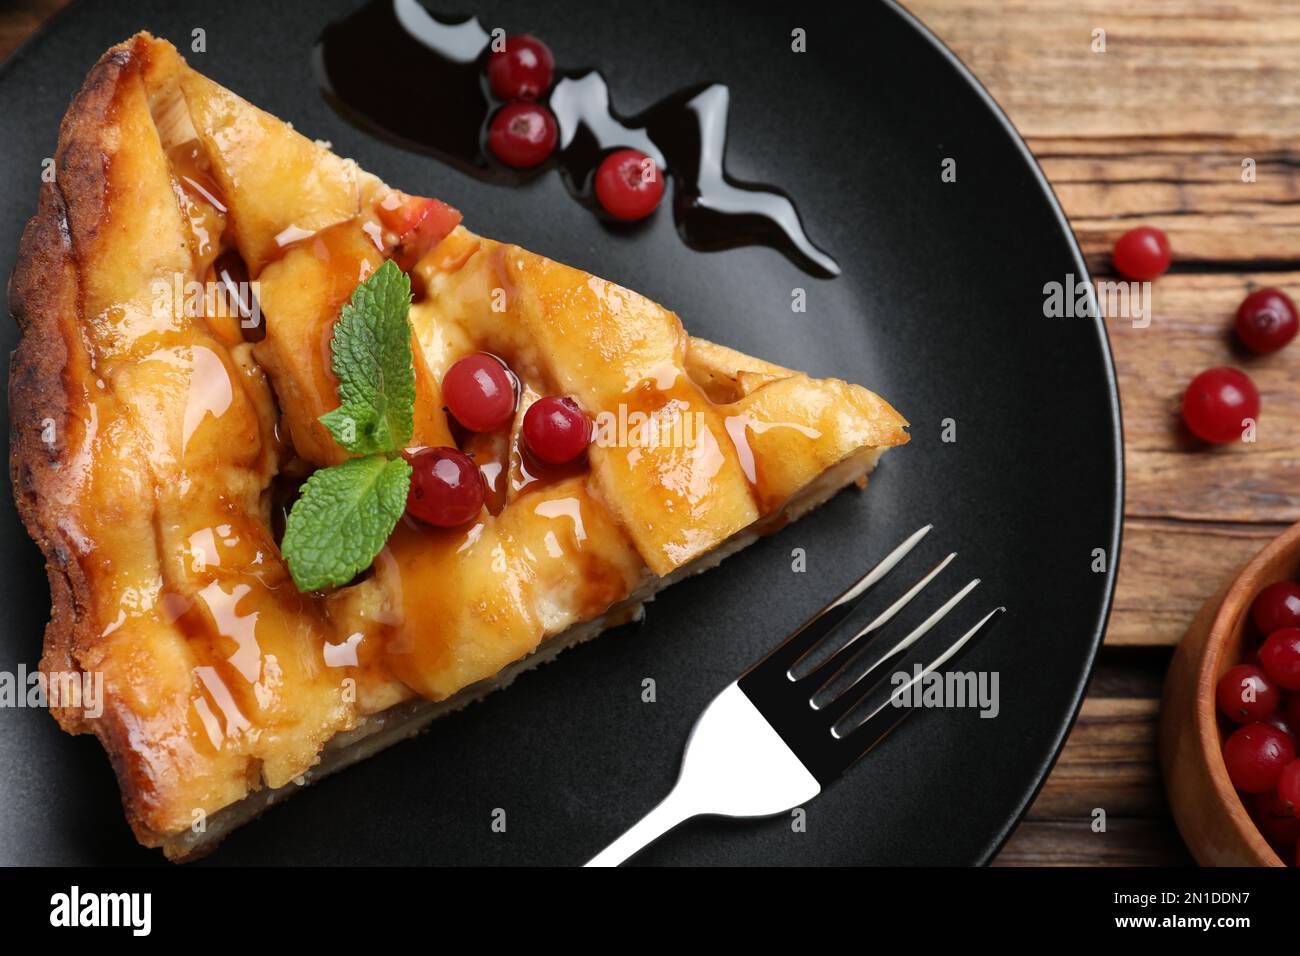 Slice of traditional apple pie with berries on wooden table, flat lay Stock Photo